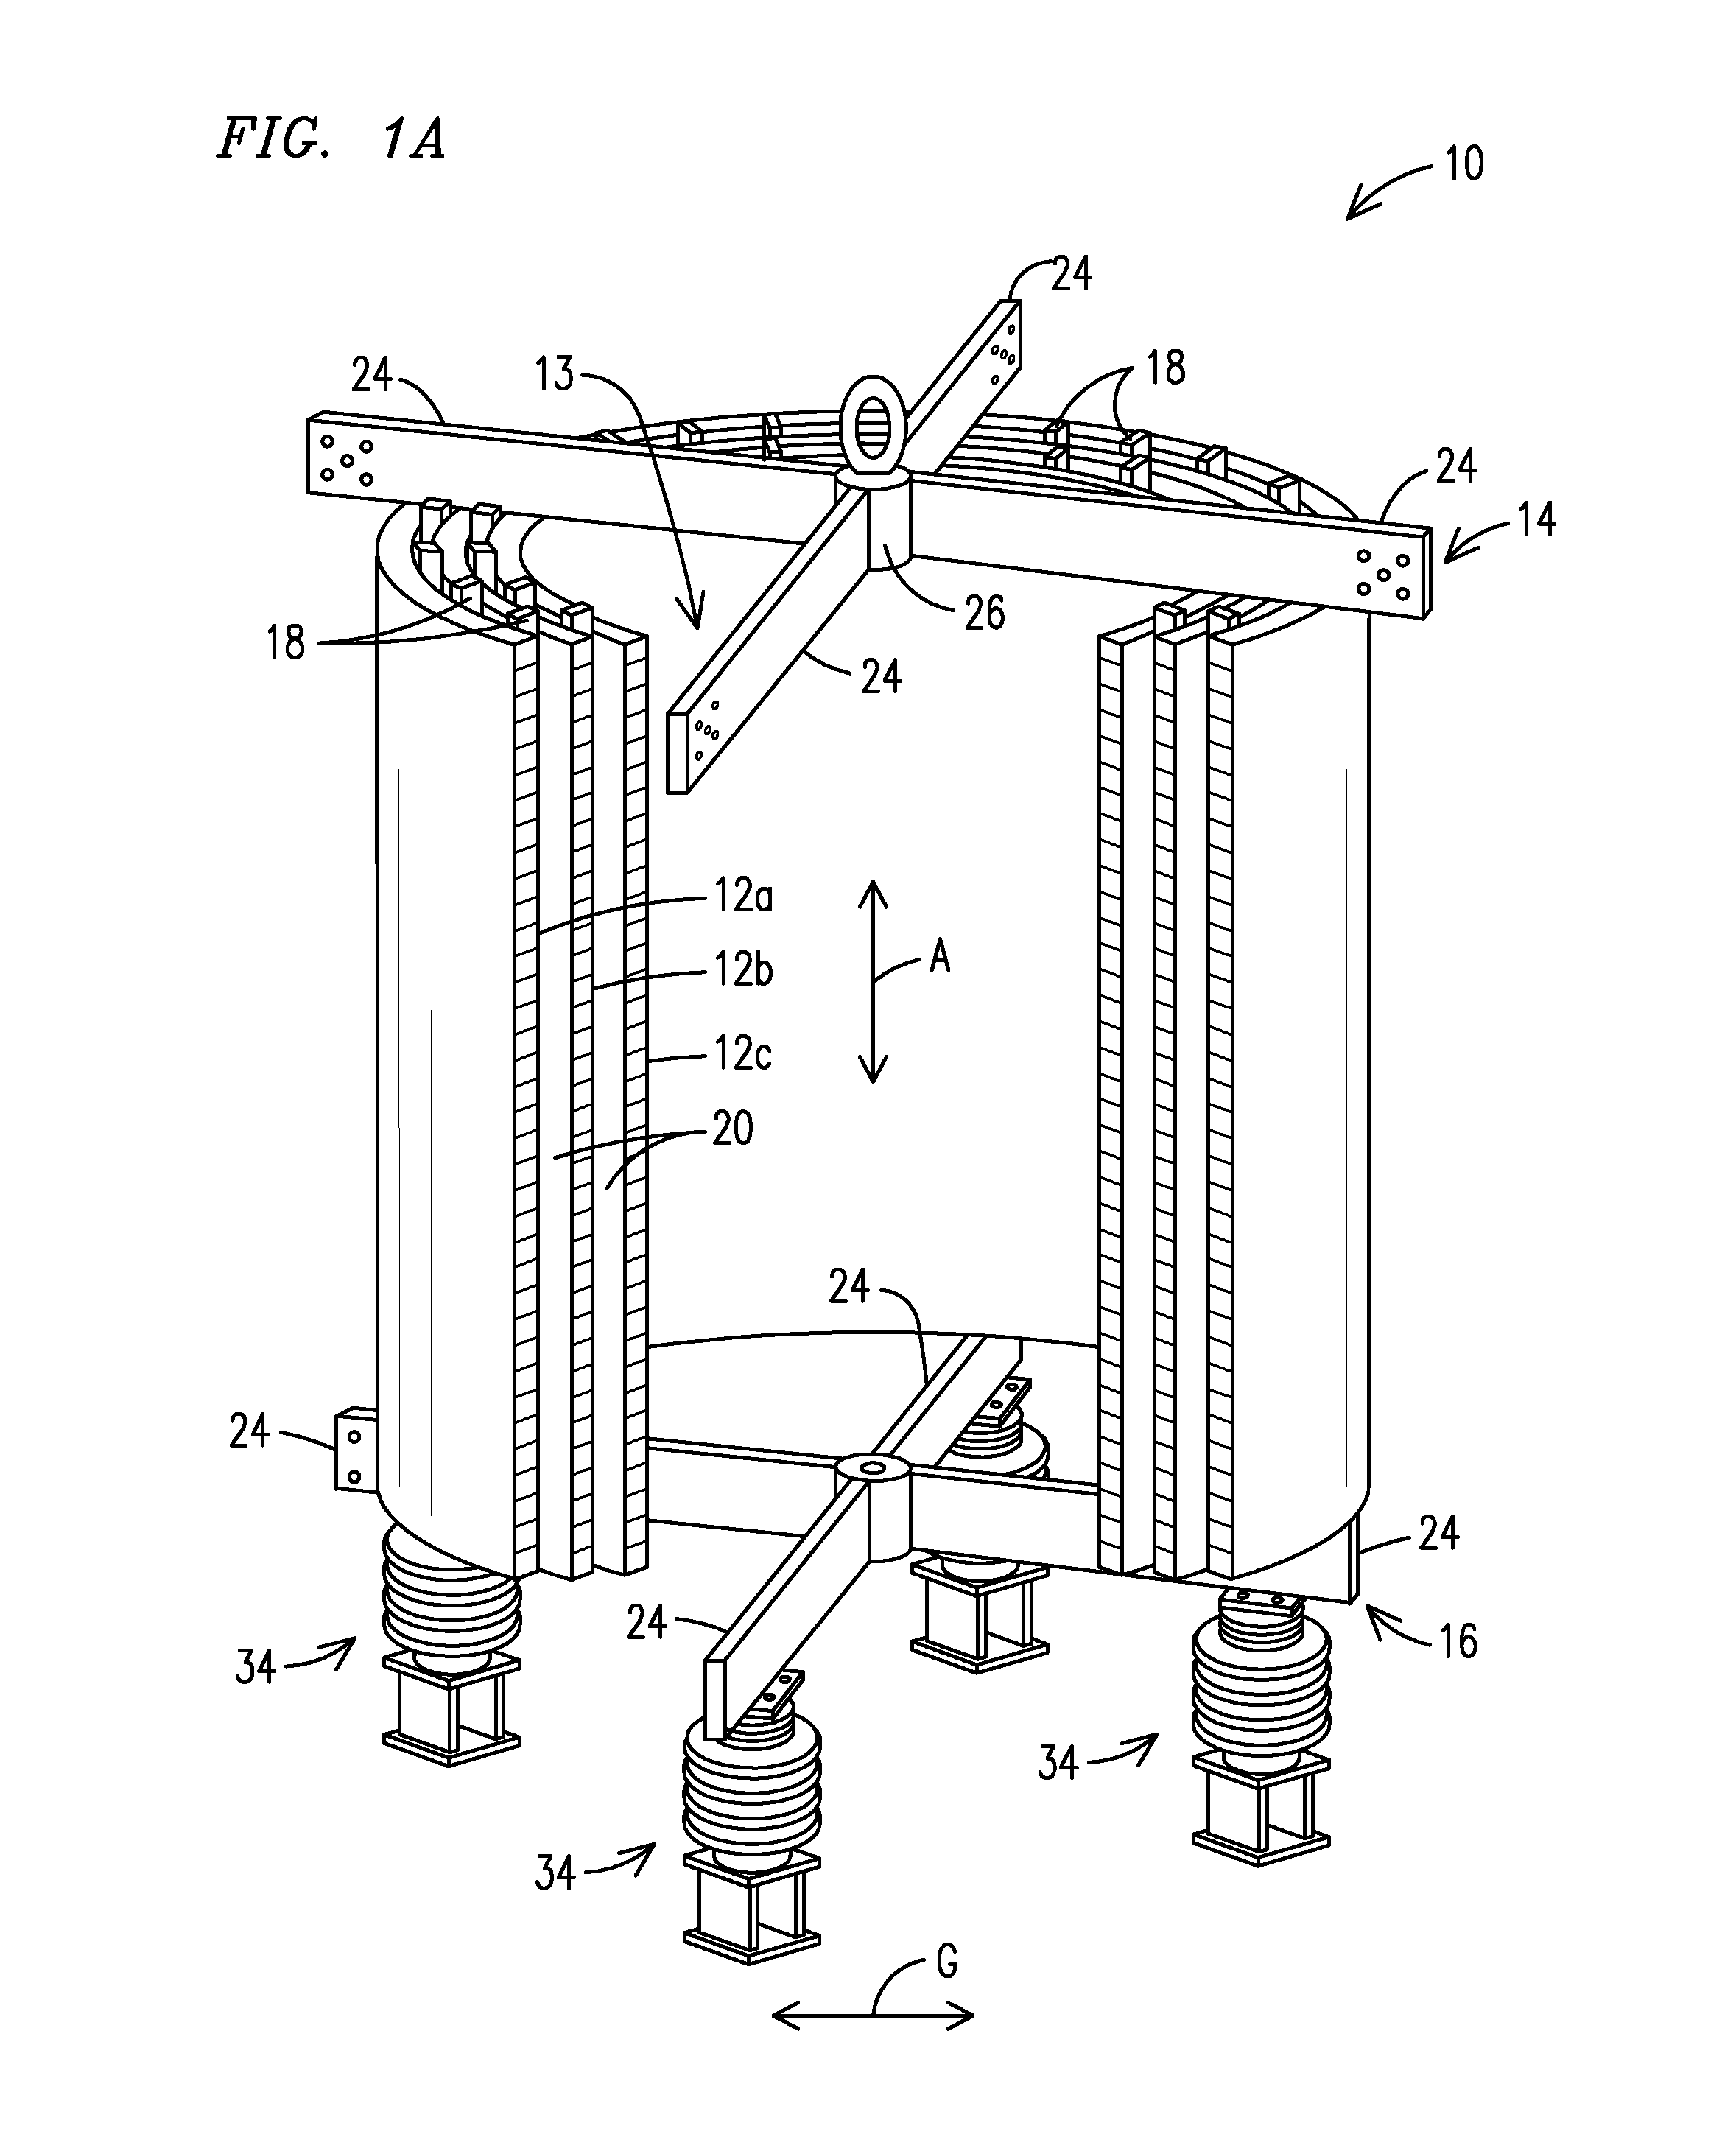 Integrated sound shield for air core reactor